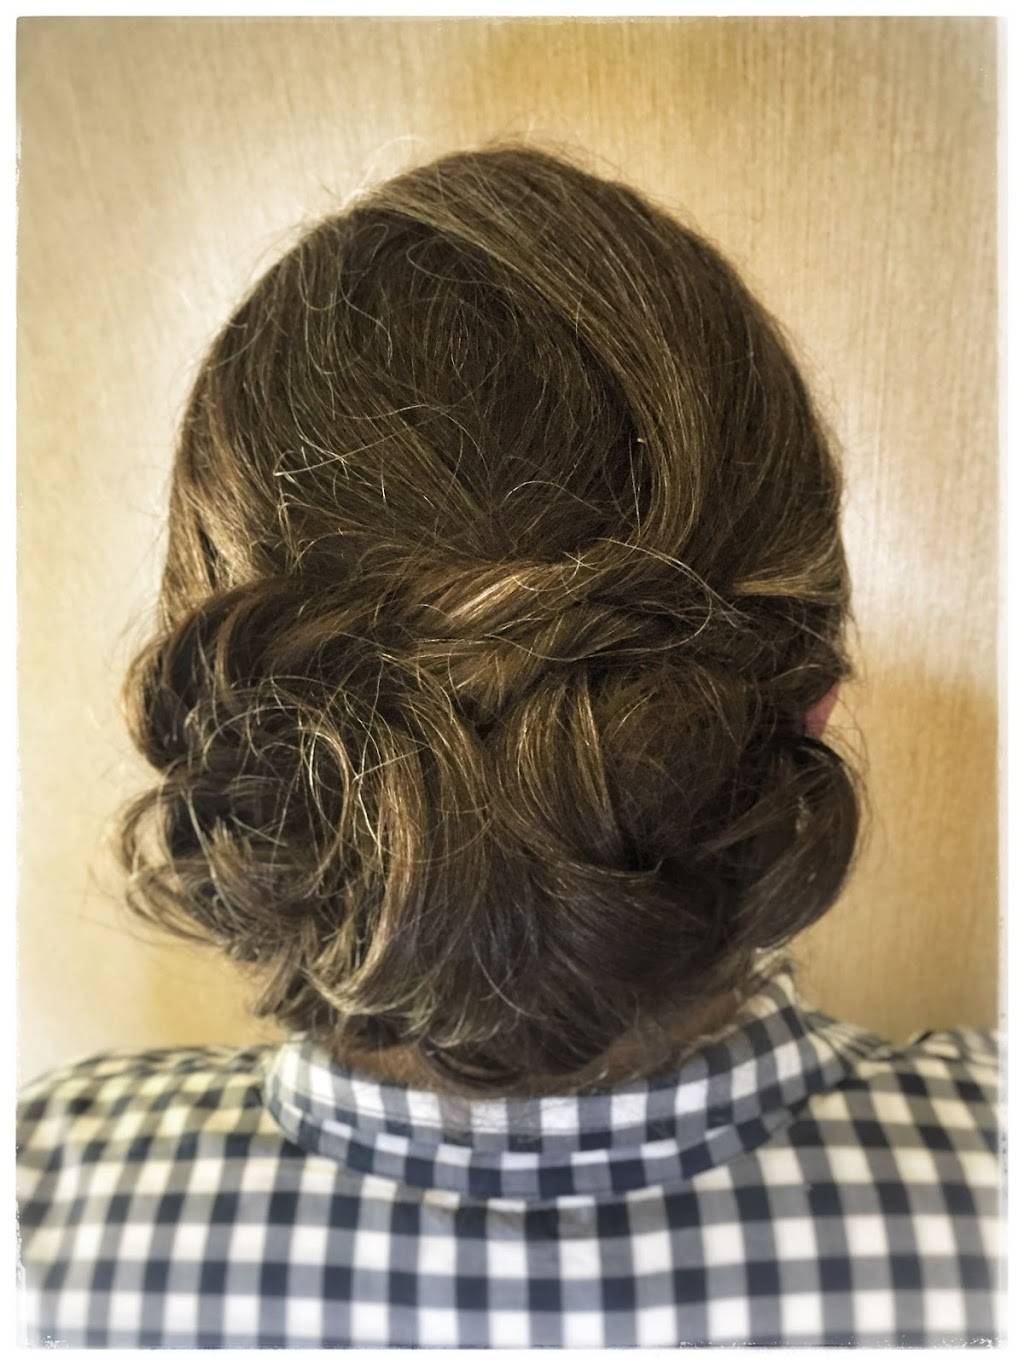 Hairology by Tammie | 5900 S University Blvd, Greenwood Village, CO 80121 | Phone: (303) 956-1201